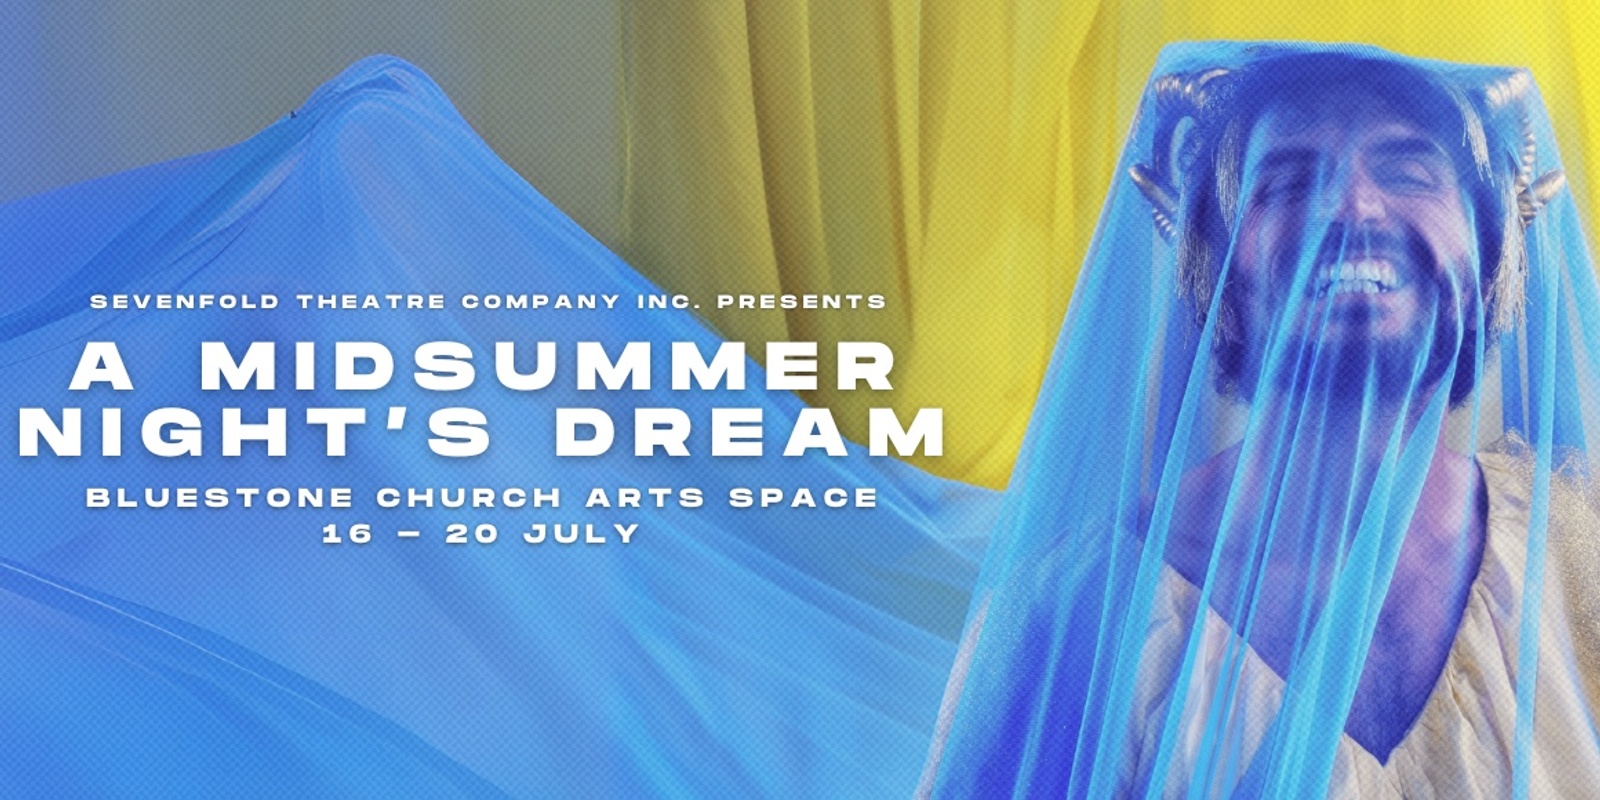 Banner image for Sevenfold Theatre Company Inc. presents 'A Midsummer Night's Dream'